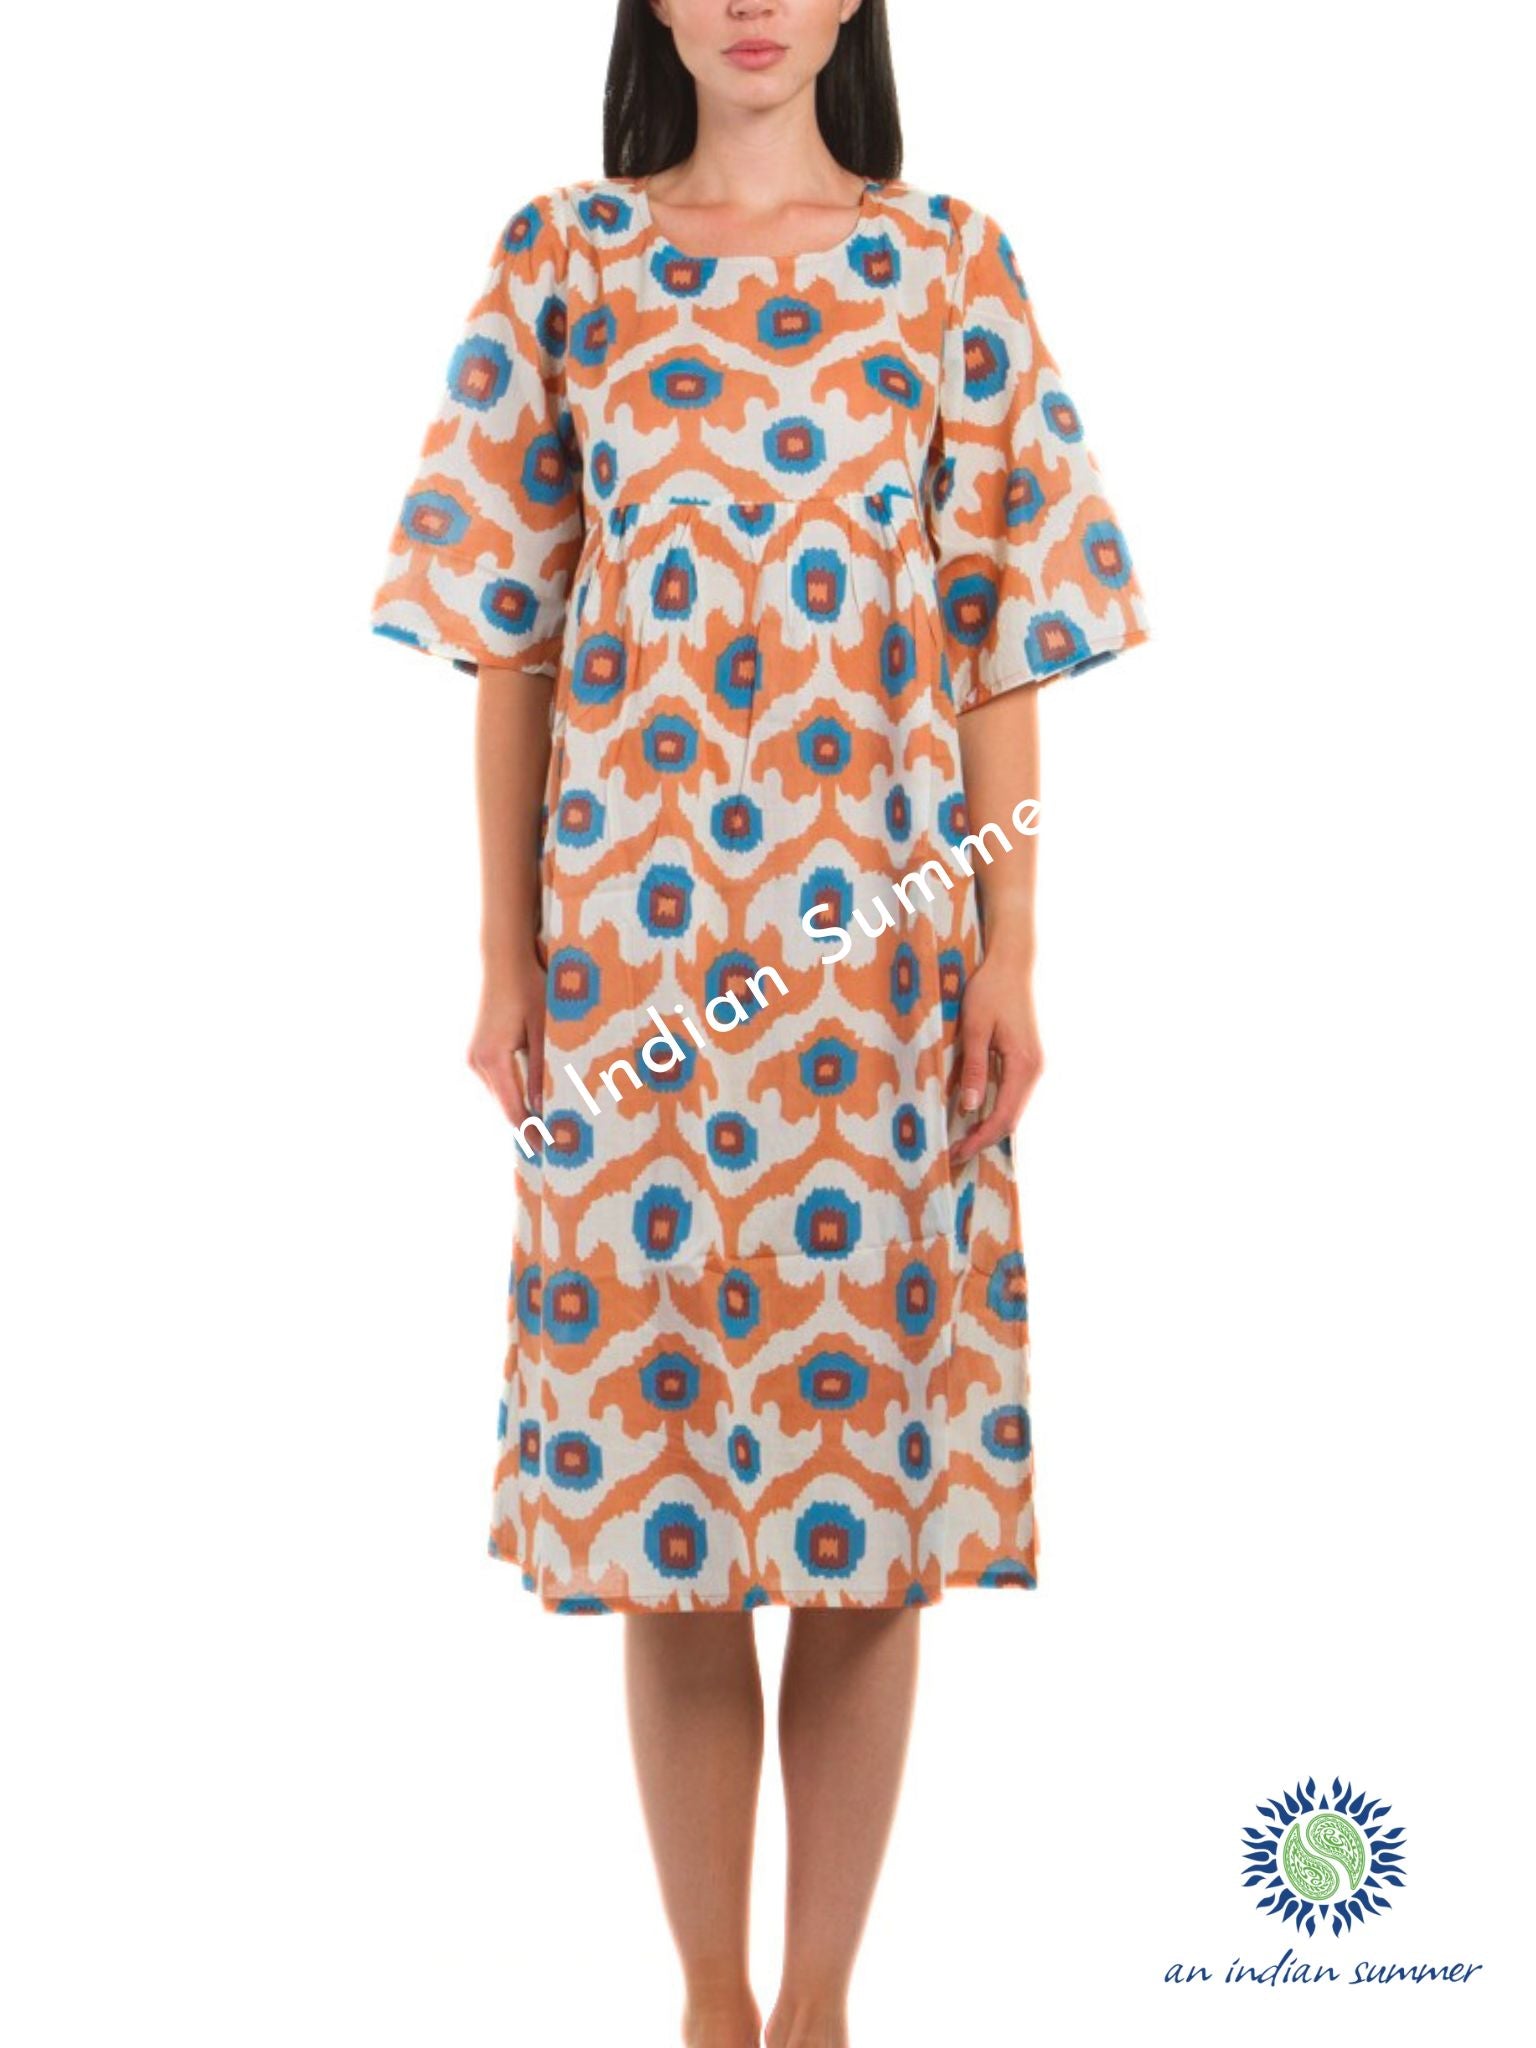 Market Dress Ikat Apricot Comfy easy-fit lightweight cotton dress with Two deep pockets An Indian Summer Timeless Sustainable Ethical Authentic Artisan Clothing Brand